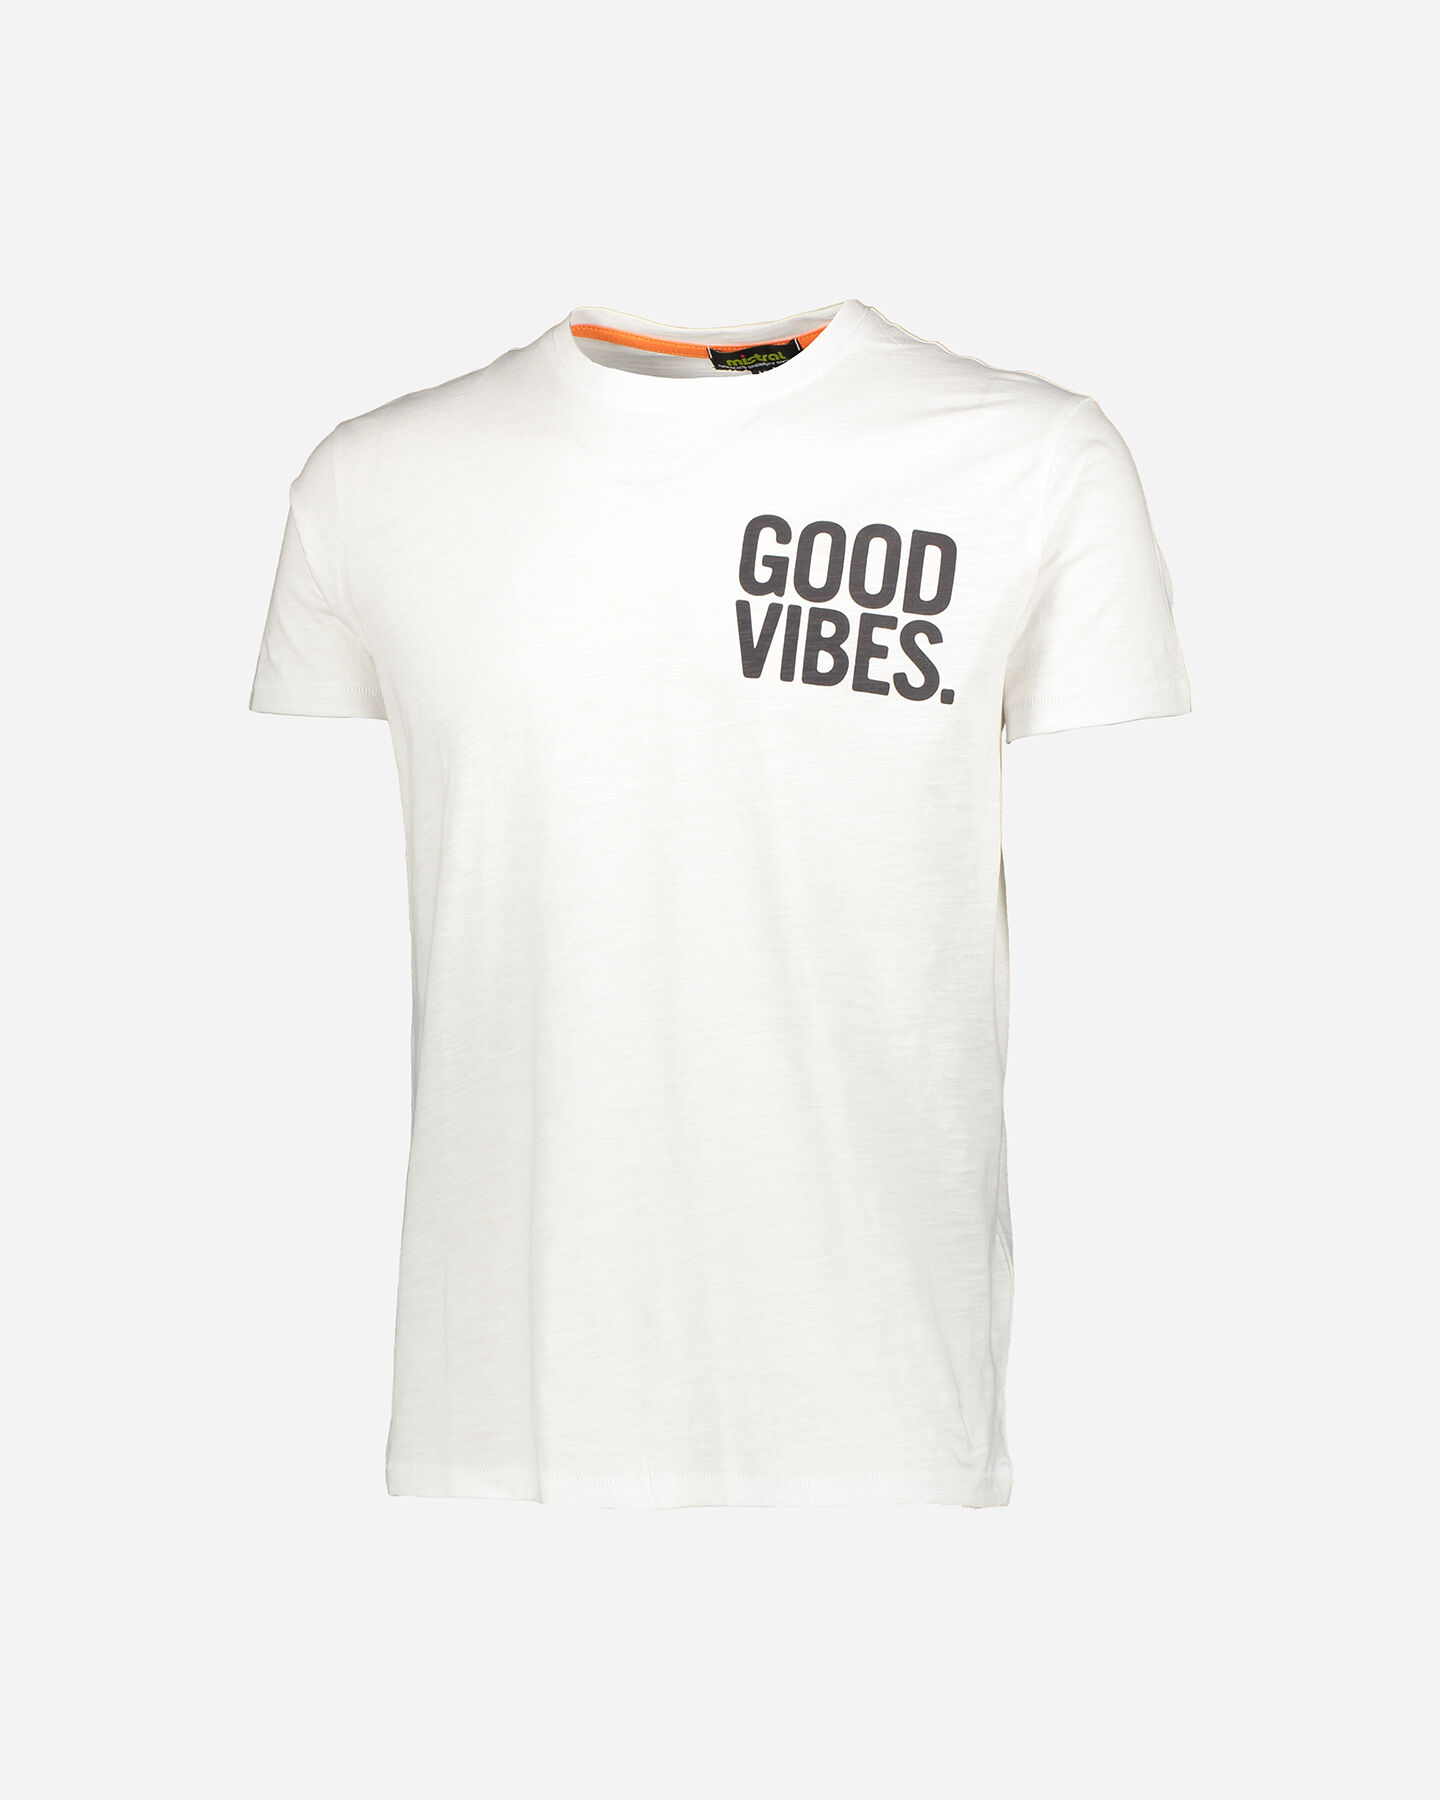  T-Shirt MISTRAL GOOD VIBES BIG LOGO M S4087940|001|XS scatto 0